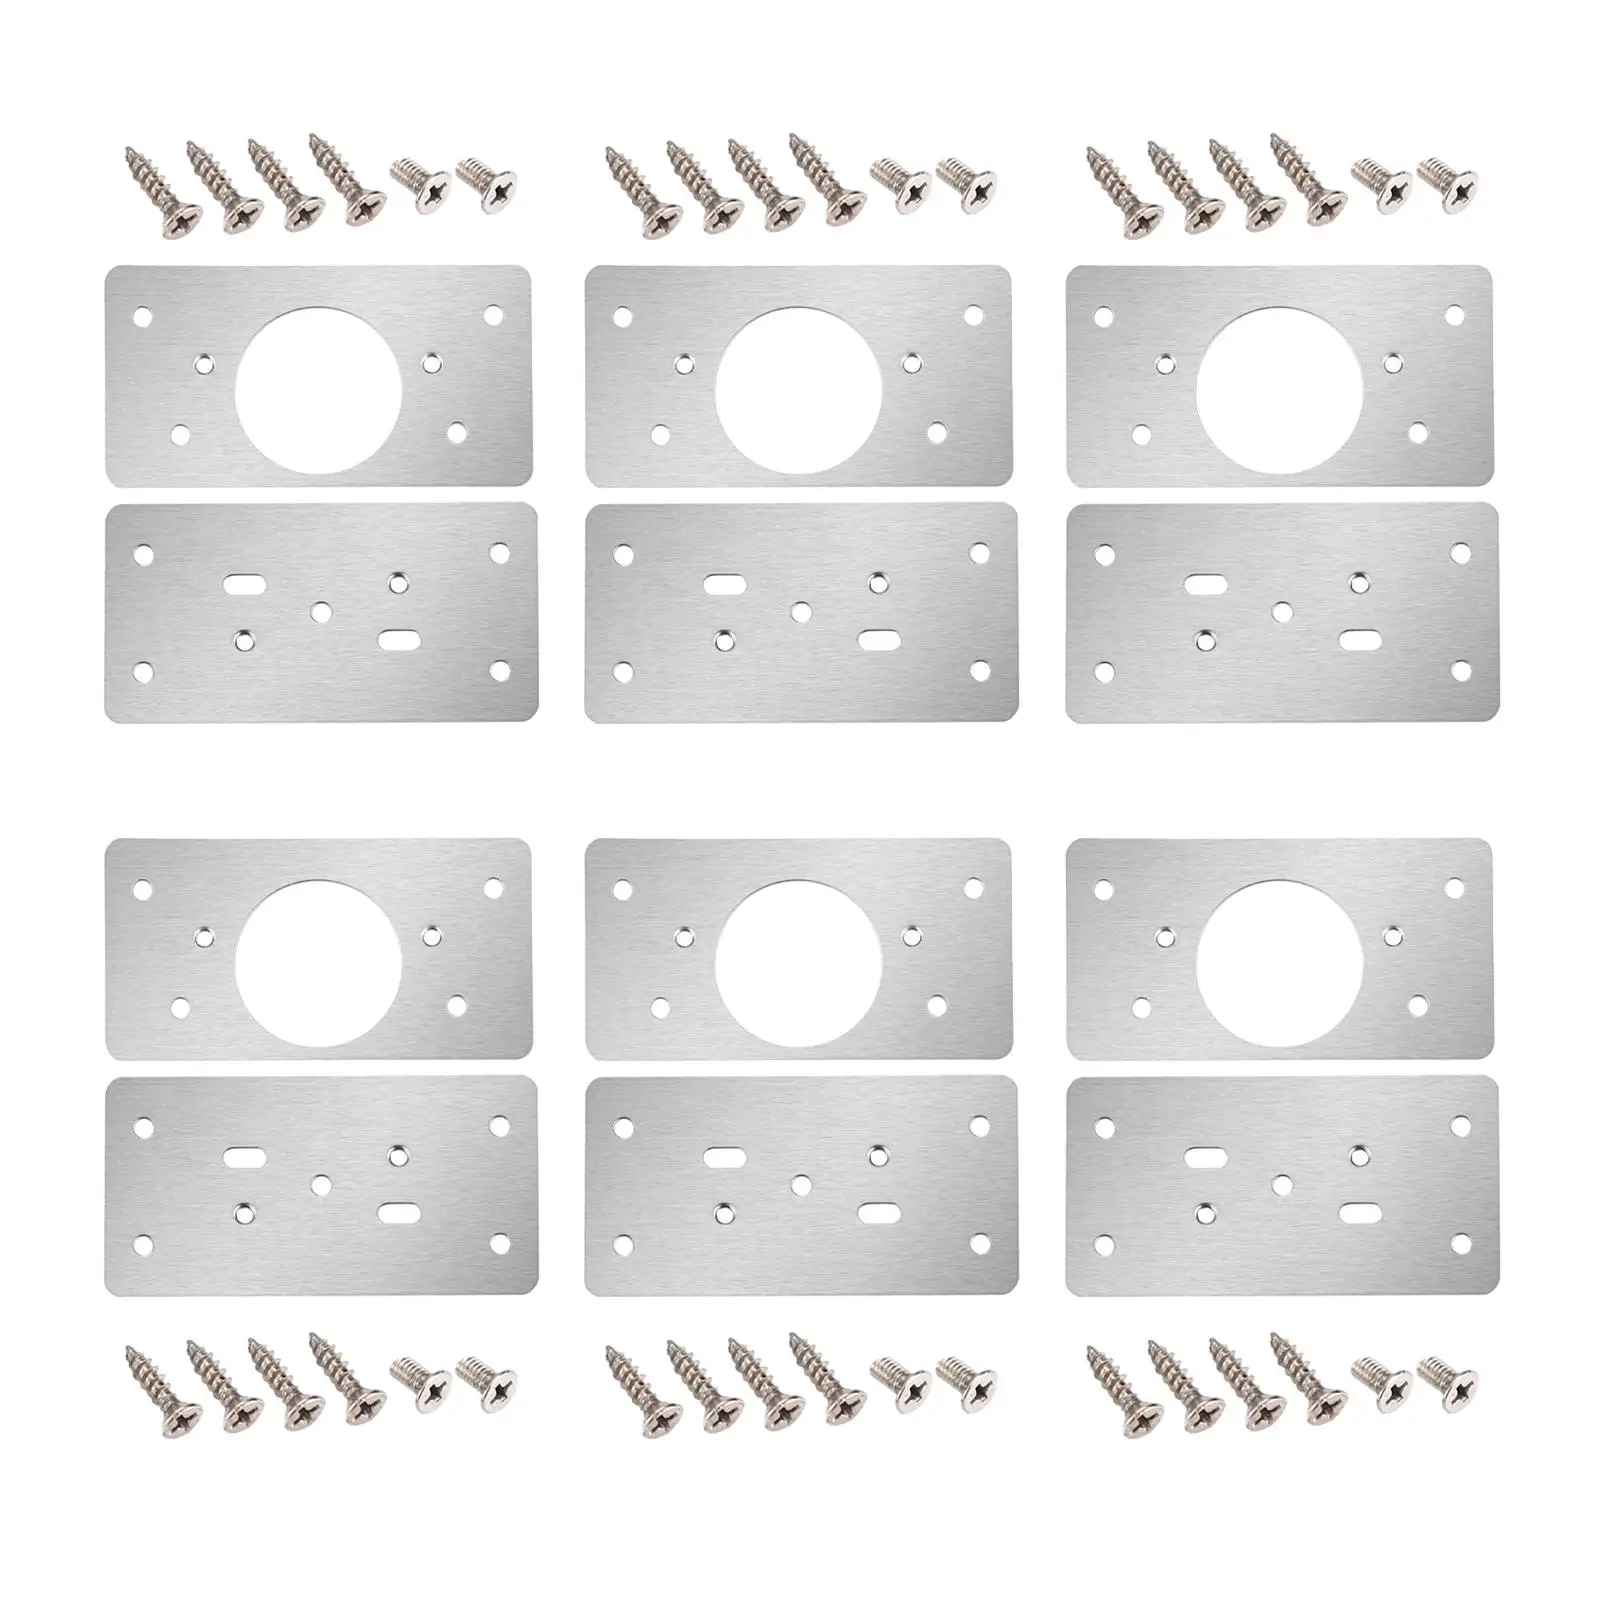 6 Pieces Hinge Repair Kits with Holes Hinges Fixing Plates with Mounting Screws for Door Wardrobe Window Wood Furniture Drawer